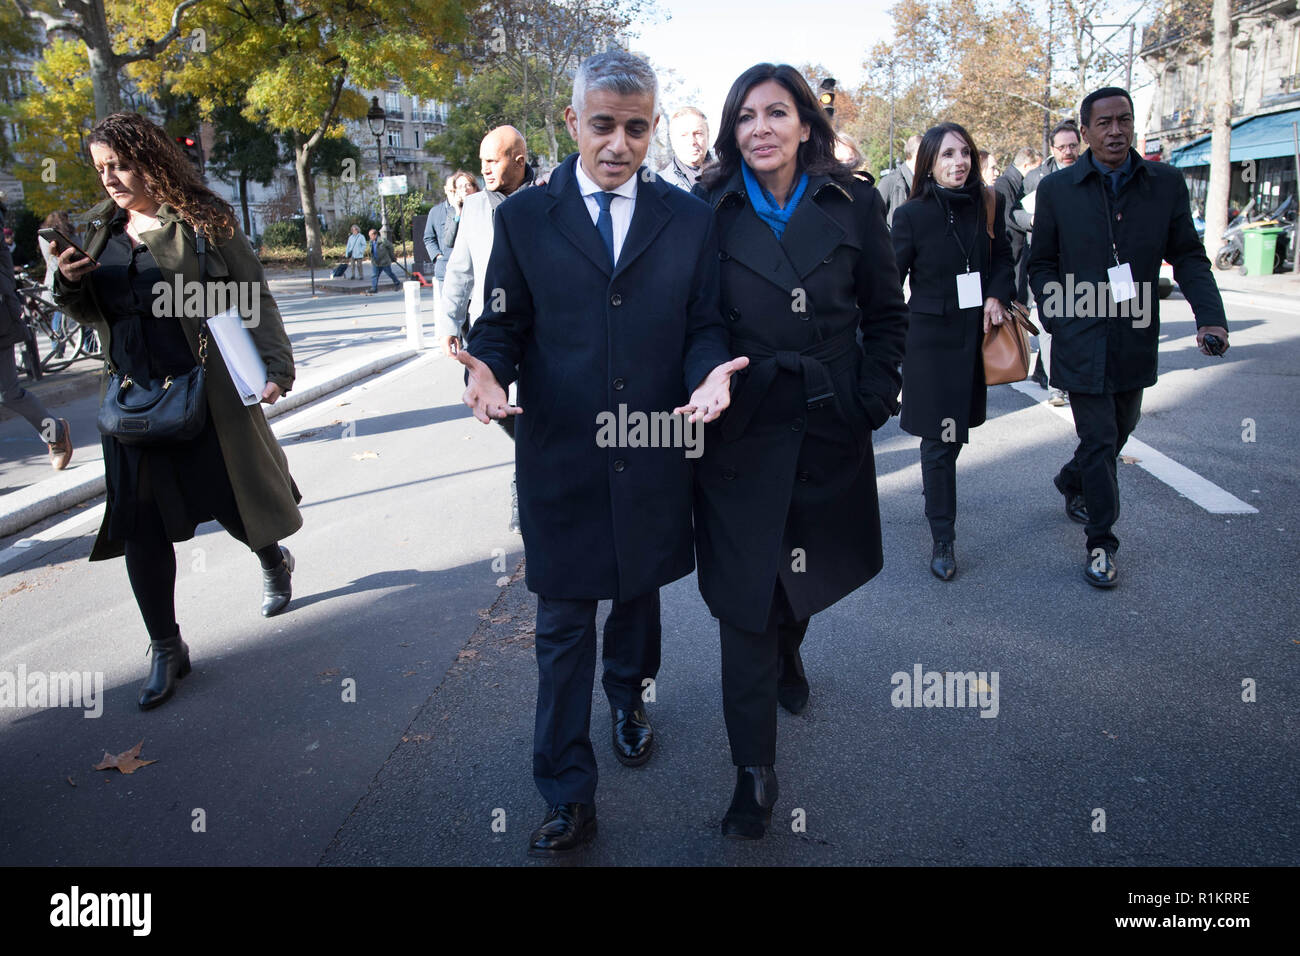 Mayor of London Sadiq Khan his Parisian counterpart Anne Hidalgo attend a memorial service to mark the third anniversary of the Bataclan terrorist attack in Paris. They met victims and emergency services, on the final day of his three day visit to Berlin and Paris where he has met with leading businesses and senior politicians, as he works to protect key trade, business and cultural ties between. London and other leading European capitals Stock Photo